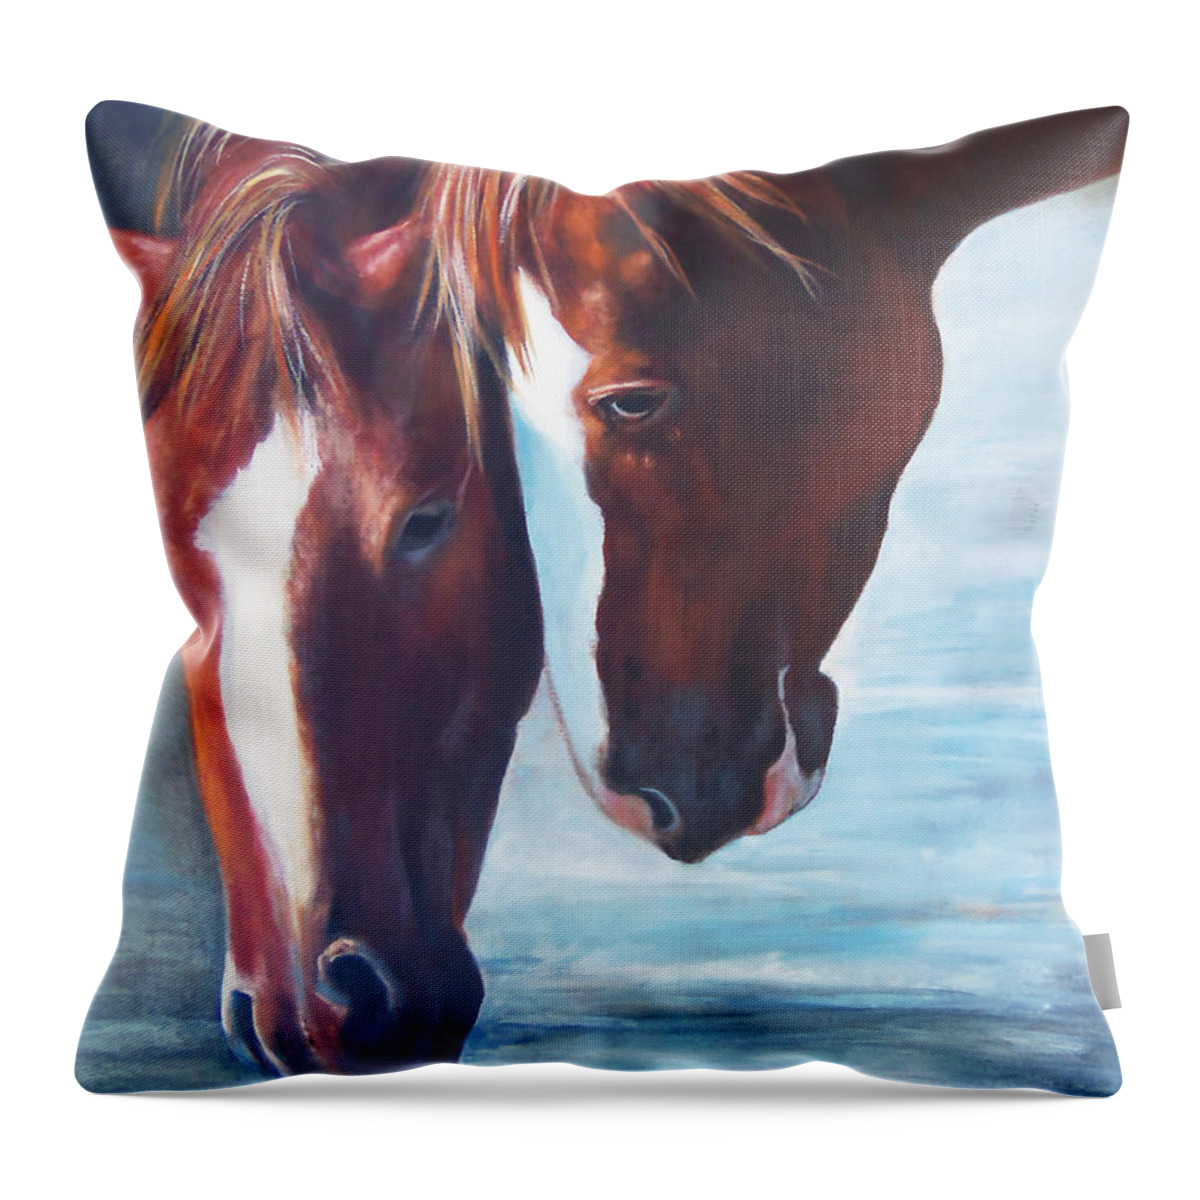 Friends For Life Painting Throw Pillow featuring the painting Friends For Life by Karen Kennedy Chatham